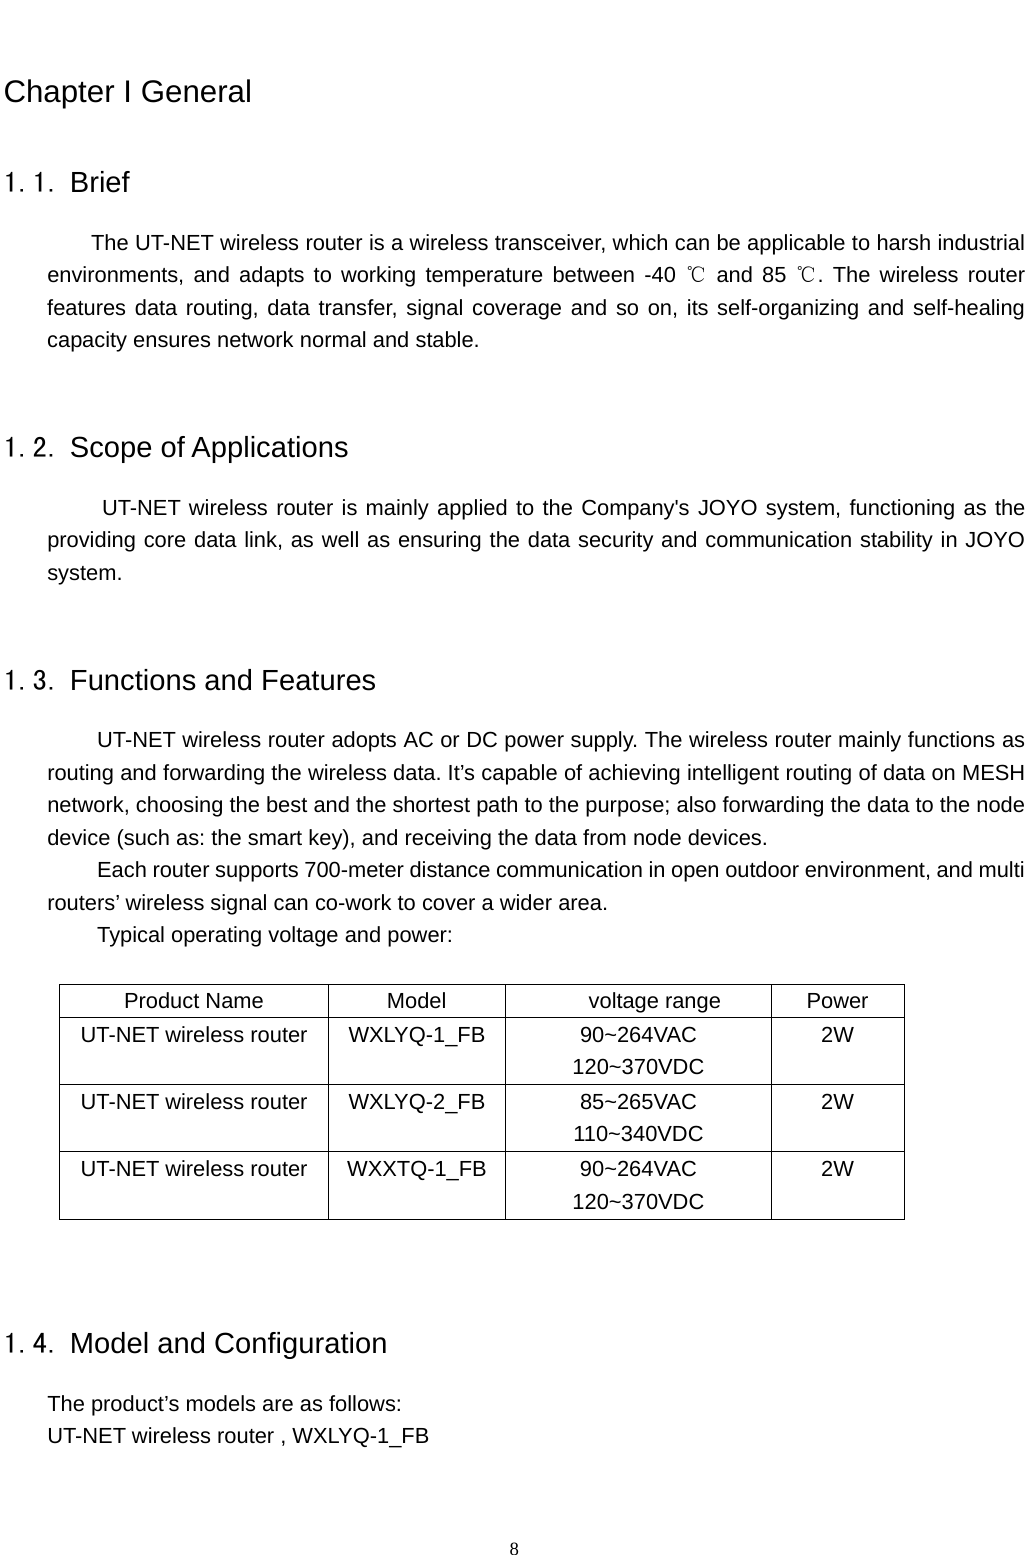   8Chapter I General 1.1. Brief The UT-NET wireless router is a wireless transceiver, which can be applicable to harsh industrial environments, and adapts to working temperature between -40   ℃and 85  . The wireless router ℃features data routing, data transfer, signal coverage and so on, its self-organizing and self-healing capacity ensures network normal and stable.    1.2. Scope of Applications UT-NET wireless router is mainly applied to the Company&apos;s JOYO system, functioning as the providing core data link, as well as ensuring the data security and communication stability in JOYO system.  1.3. Functions and Features UT-NET wireless router adopts AC or DC power supply. The wireless router mainly functions as routing and forwarding the wireless data. It’s capable of achieving intelligent routing of data on MESH network, choosing the best and the shortest path to the purpose; also forwarding the data to the node device (such as: the smart key), and receiving the data from node devices. Each router supports 700-meter distance communication in open outdoor environment, and multi routers’ wireless signal can co-work to cover a wider area. Typical operating voltage and power:  Product Name  Model     voltage range  Power UT-NET wireless router  WXLYQ-1_FB  90~264VAC 120~370VDC 2W UT-NET wireless router  WXLYQ-2_FB  85~265VAC 110~340VDC 2W UT-NET wireless router  WXXTQ-1_FB 90~264VAC 120~370VDC 2W   1.4. Model and Configuration The product’s models are as follows: UT-NET wireless router , WXLYQ-1_FB 